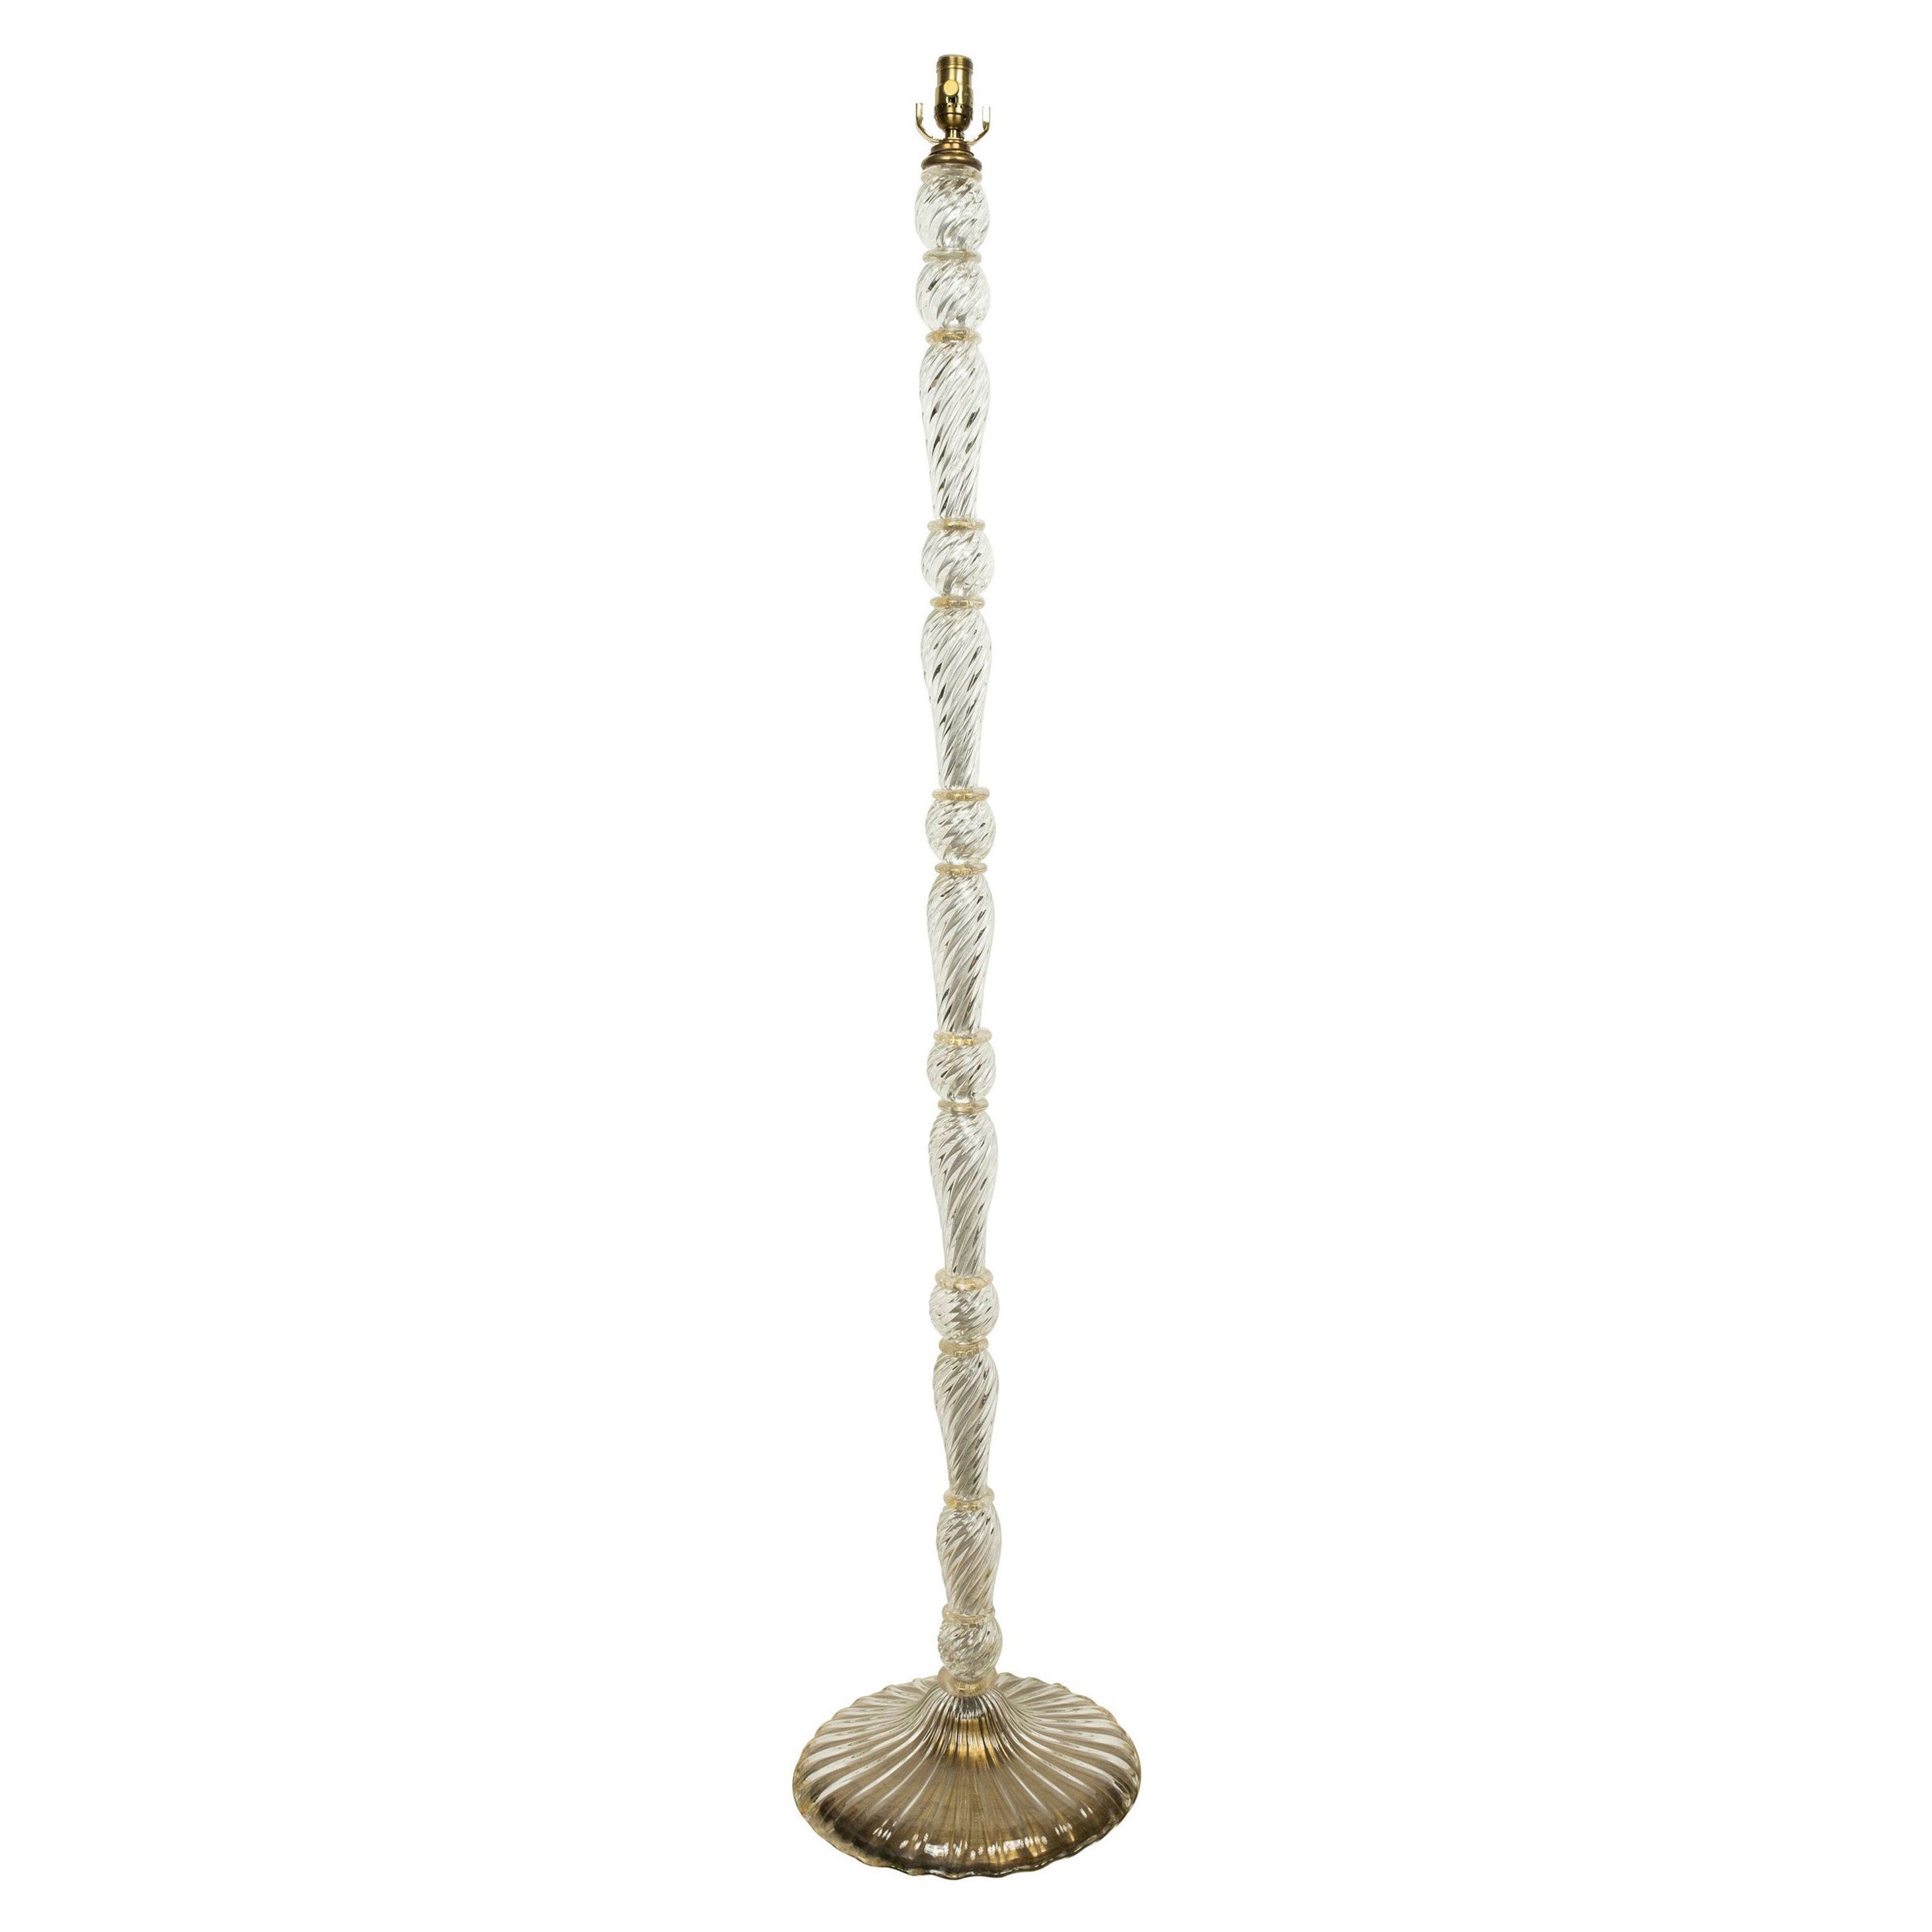 Clear Murano Glass Floor Lamp Infused with Gold